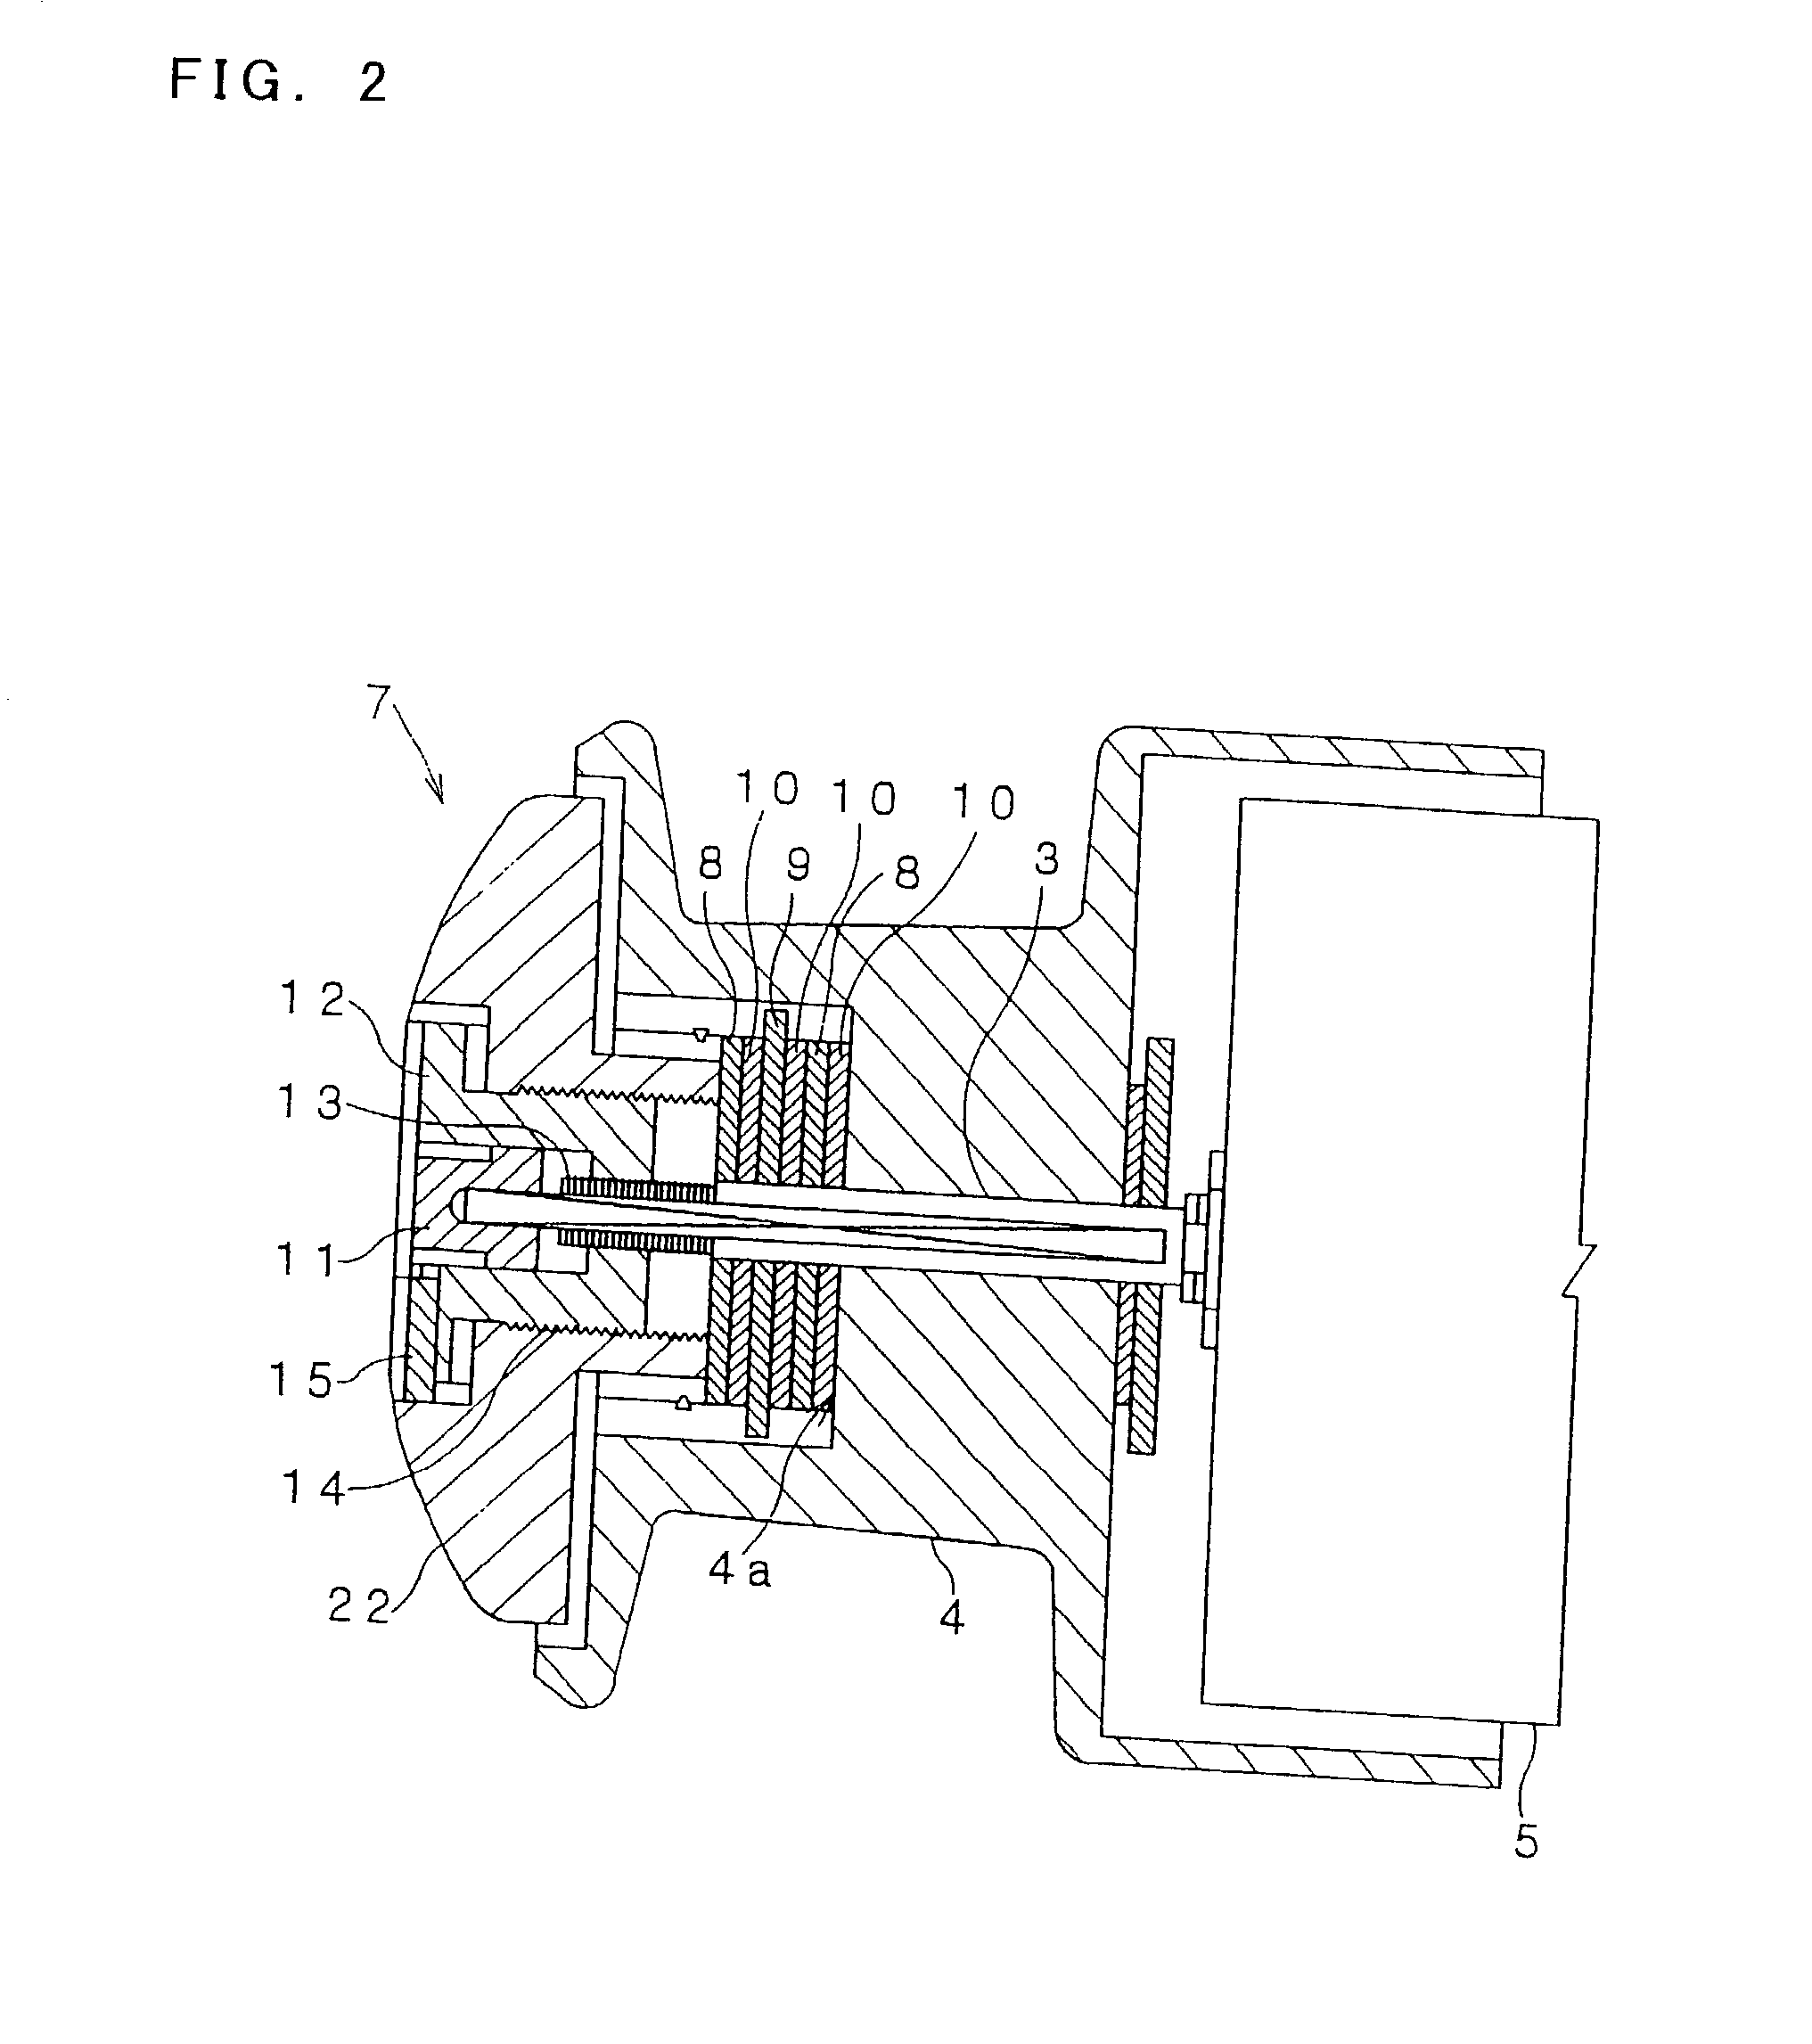 Drag washer of reel for fishing and reel for washing using the same